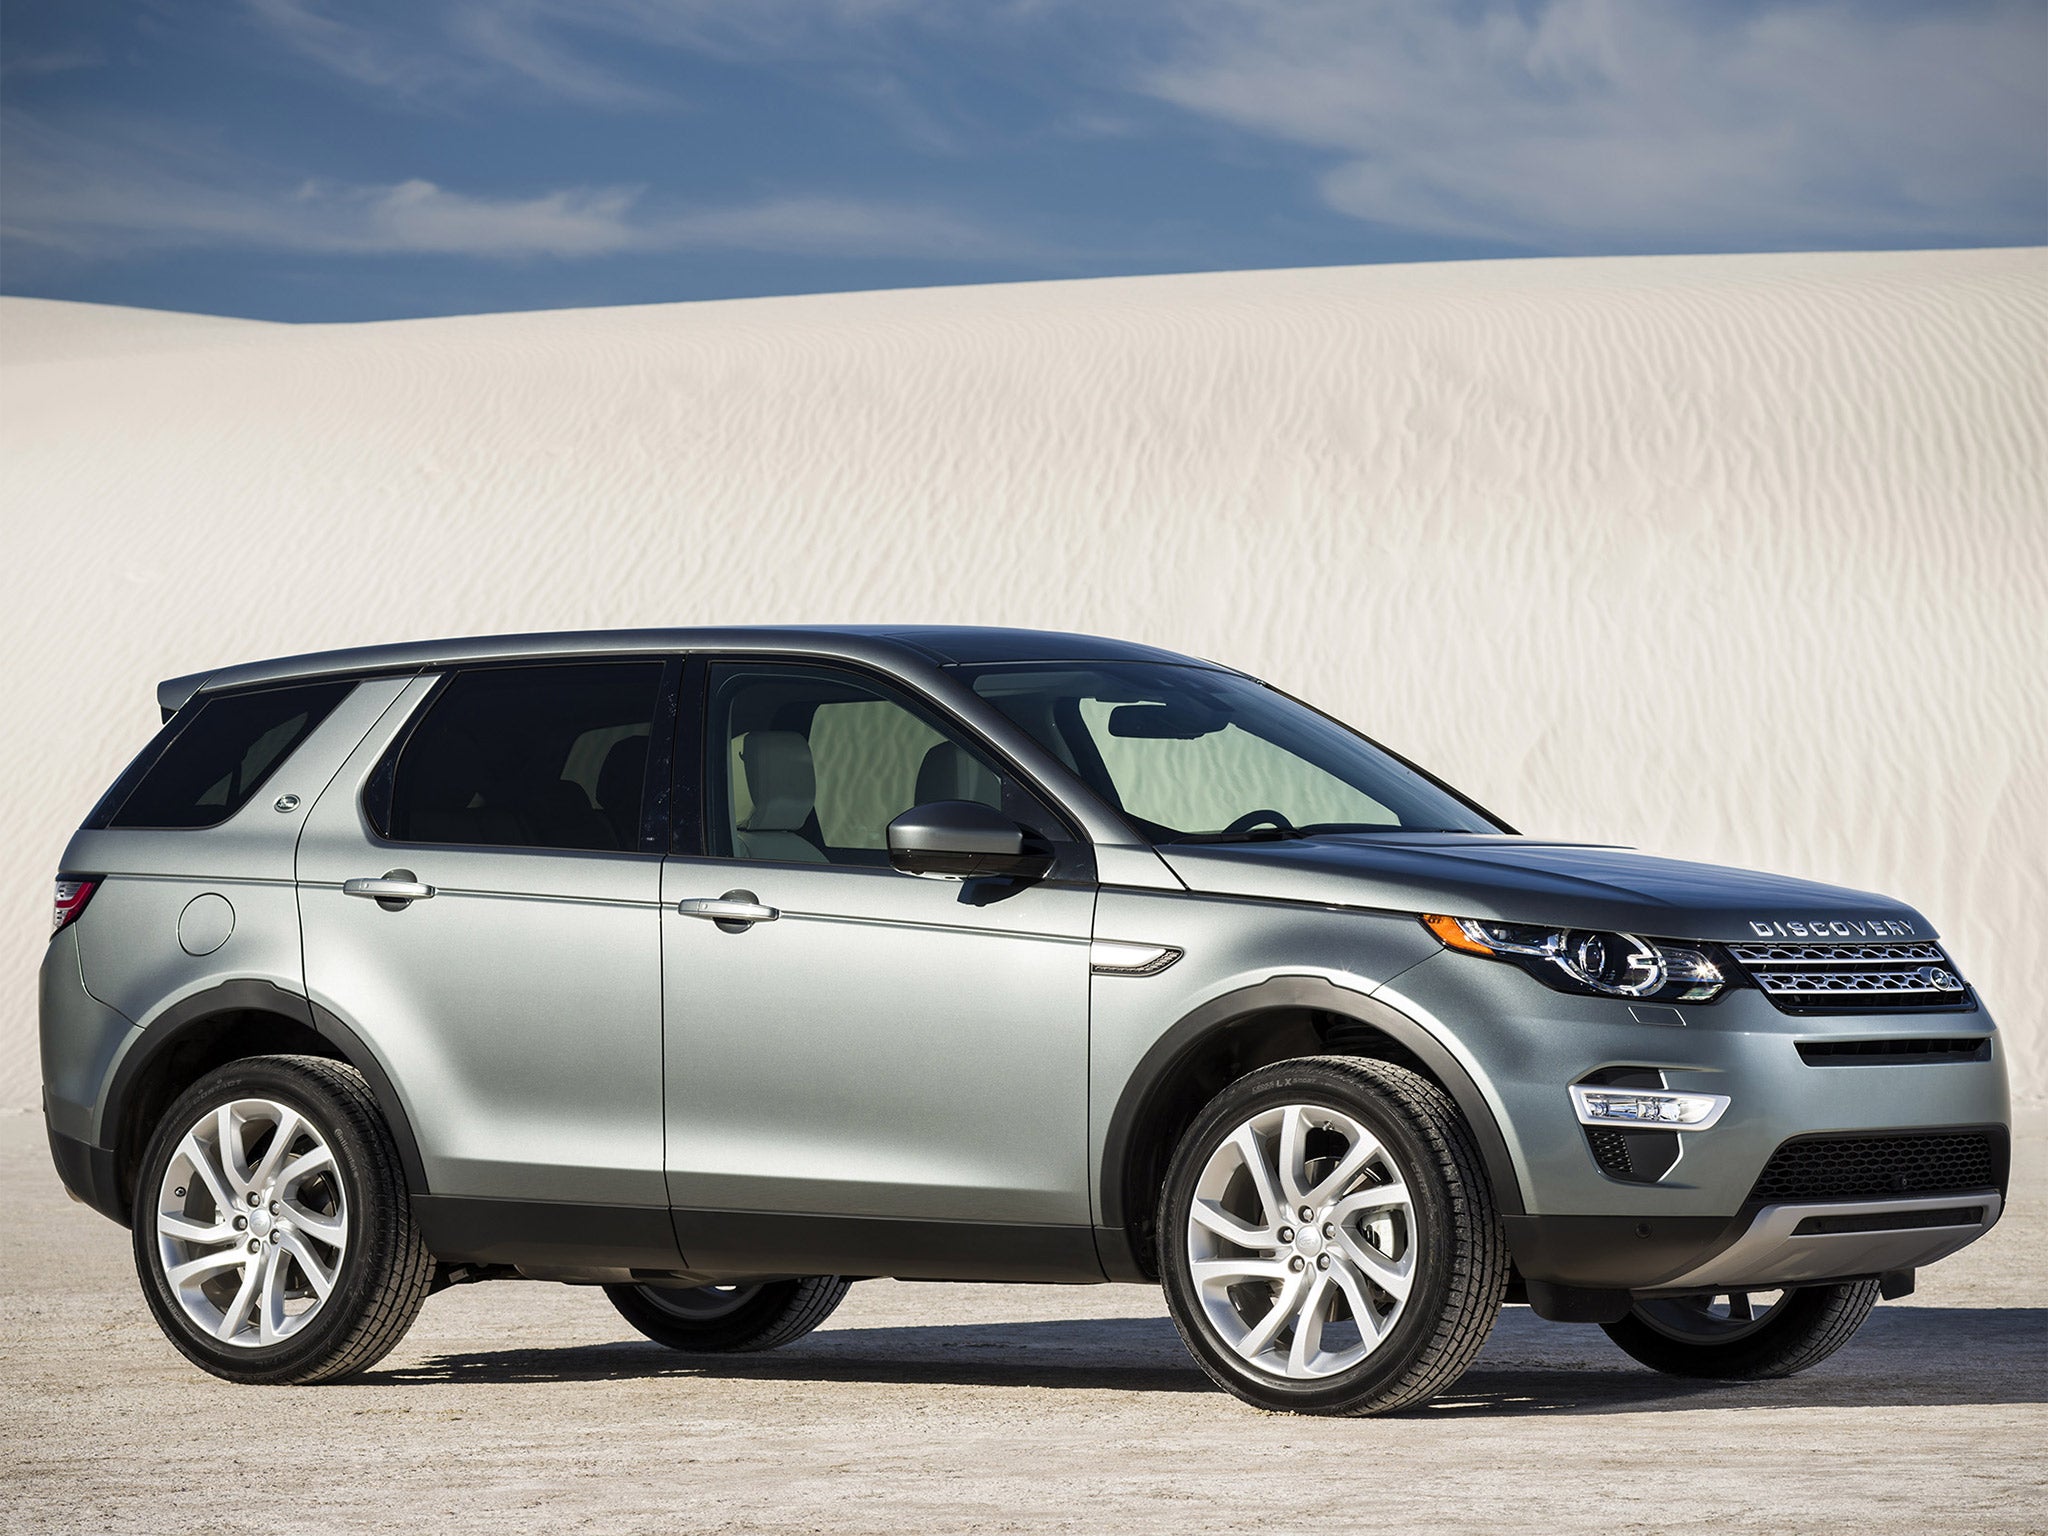 Curious beast: The new Land Rover Discovery Sport